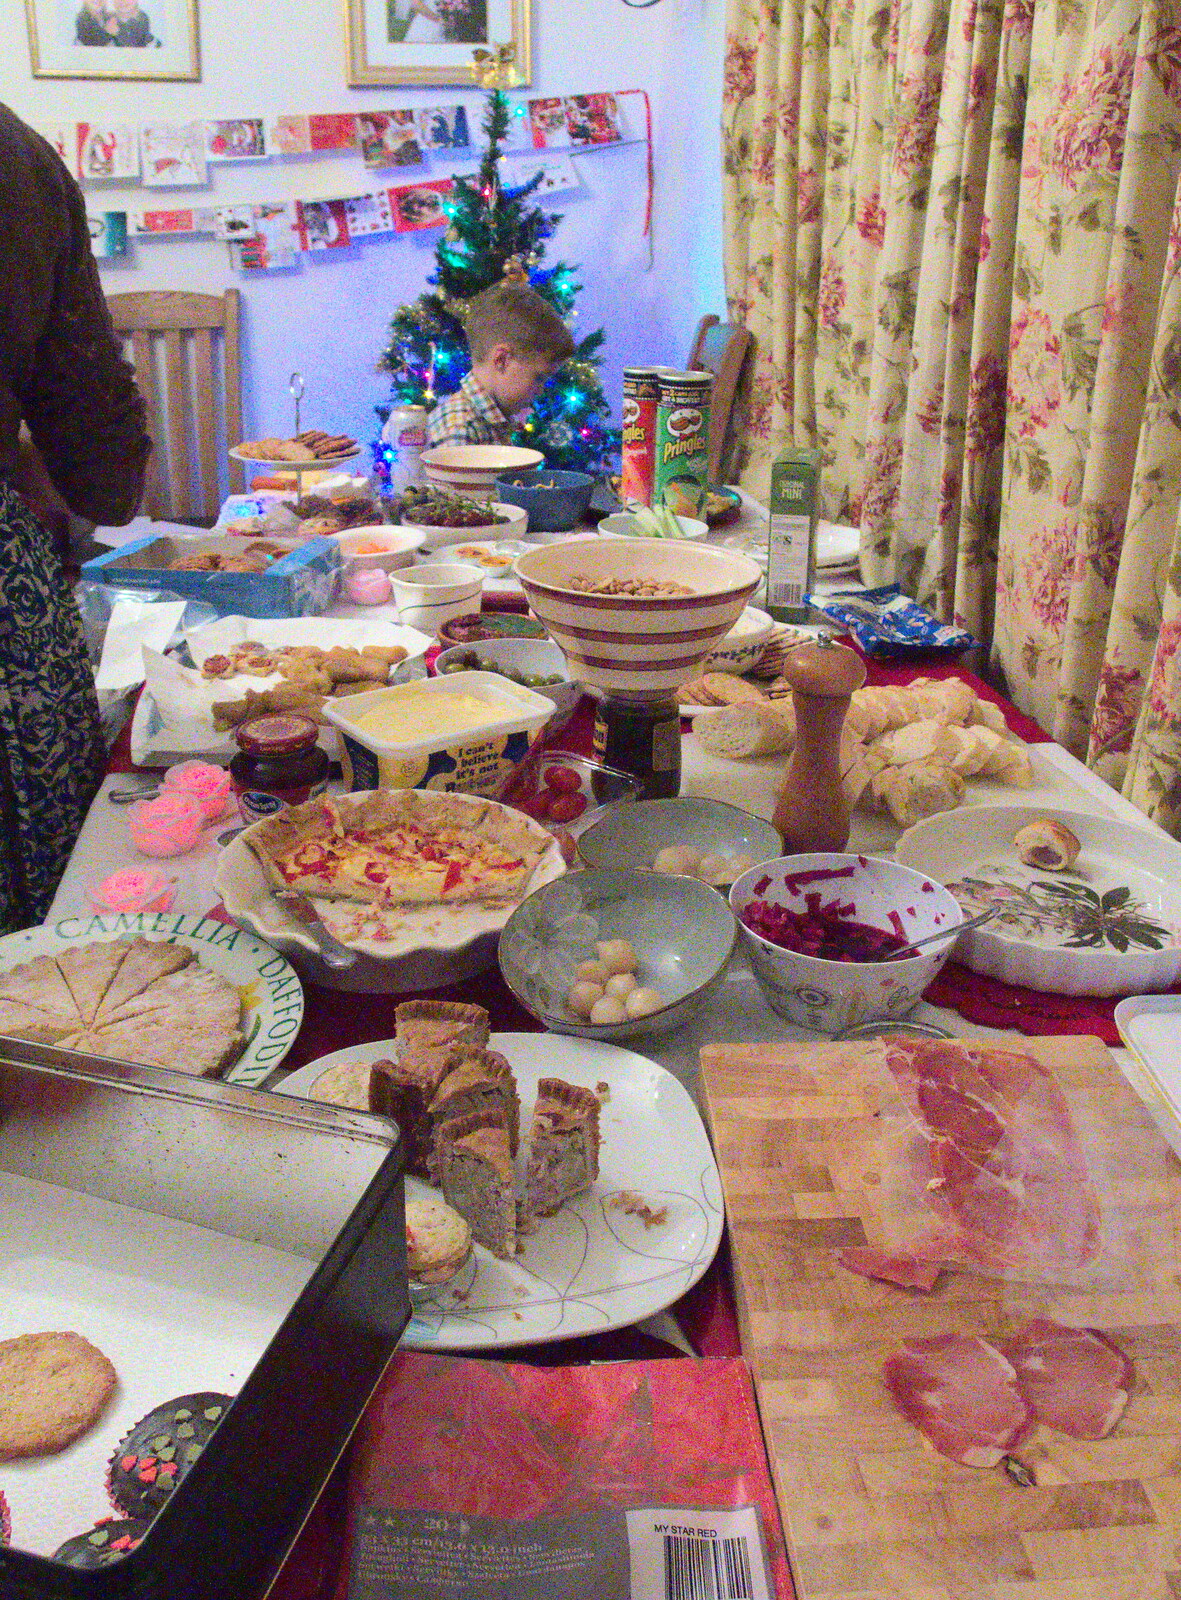 A table heaped with party food from A Party and a Road Trip to Chester, Suffolk and Cheshire - 20th December 2015